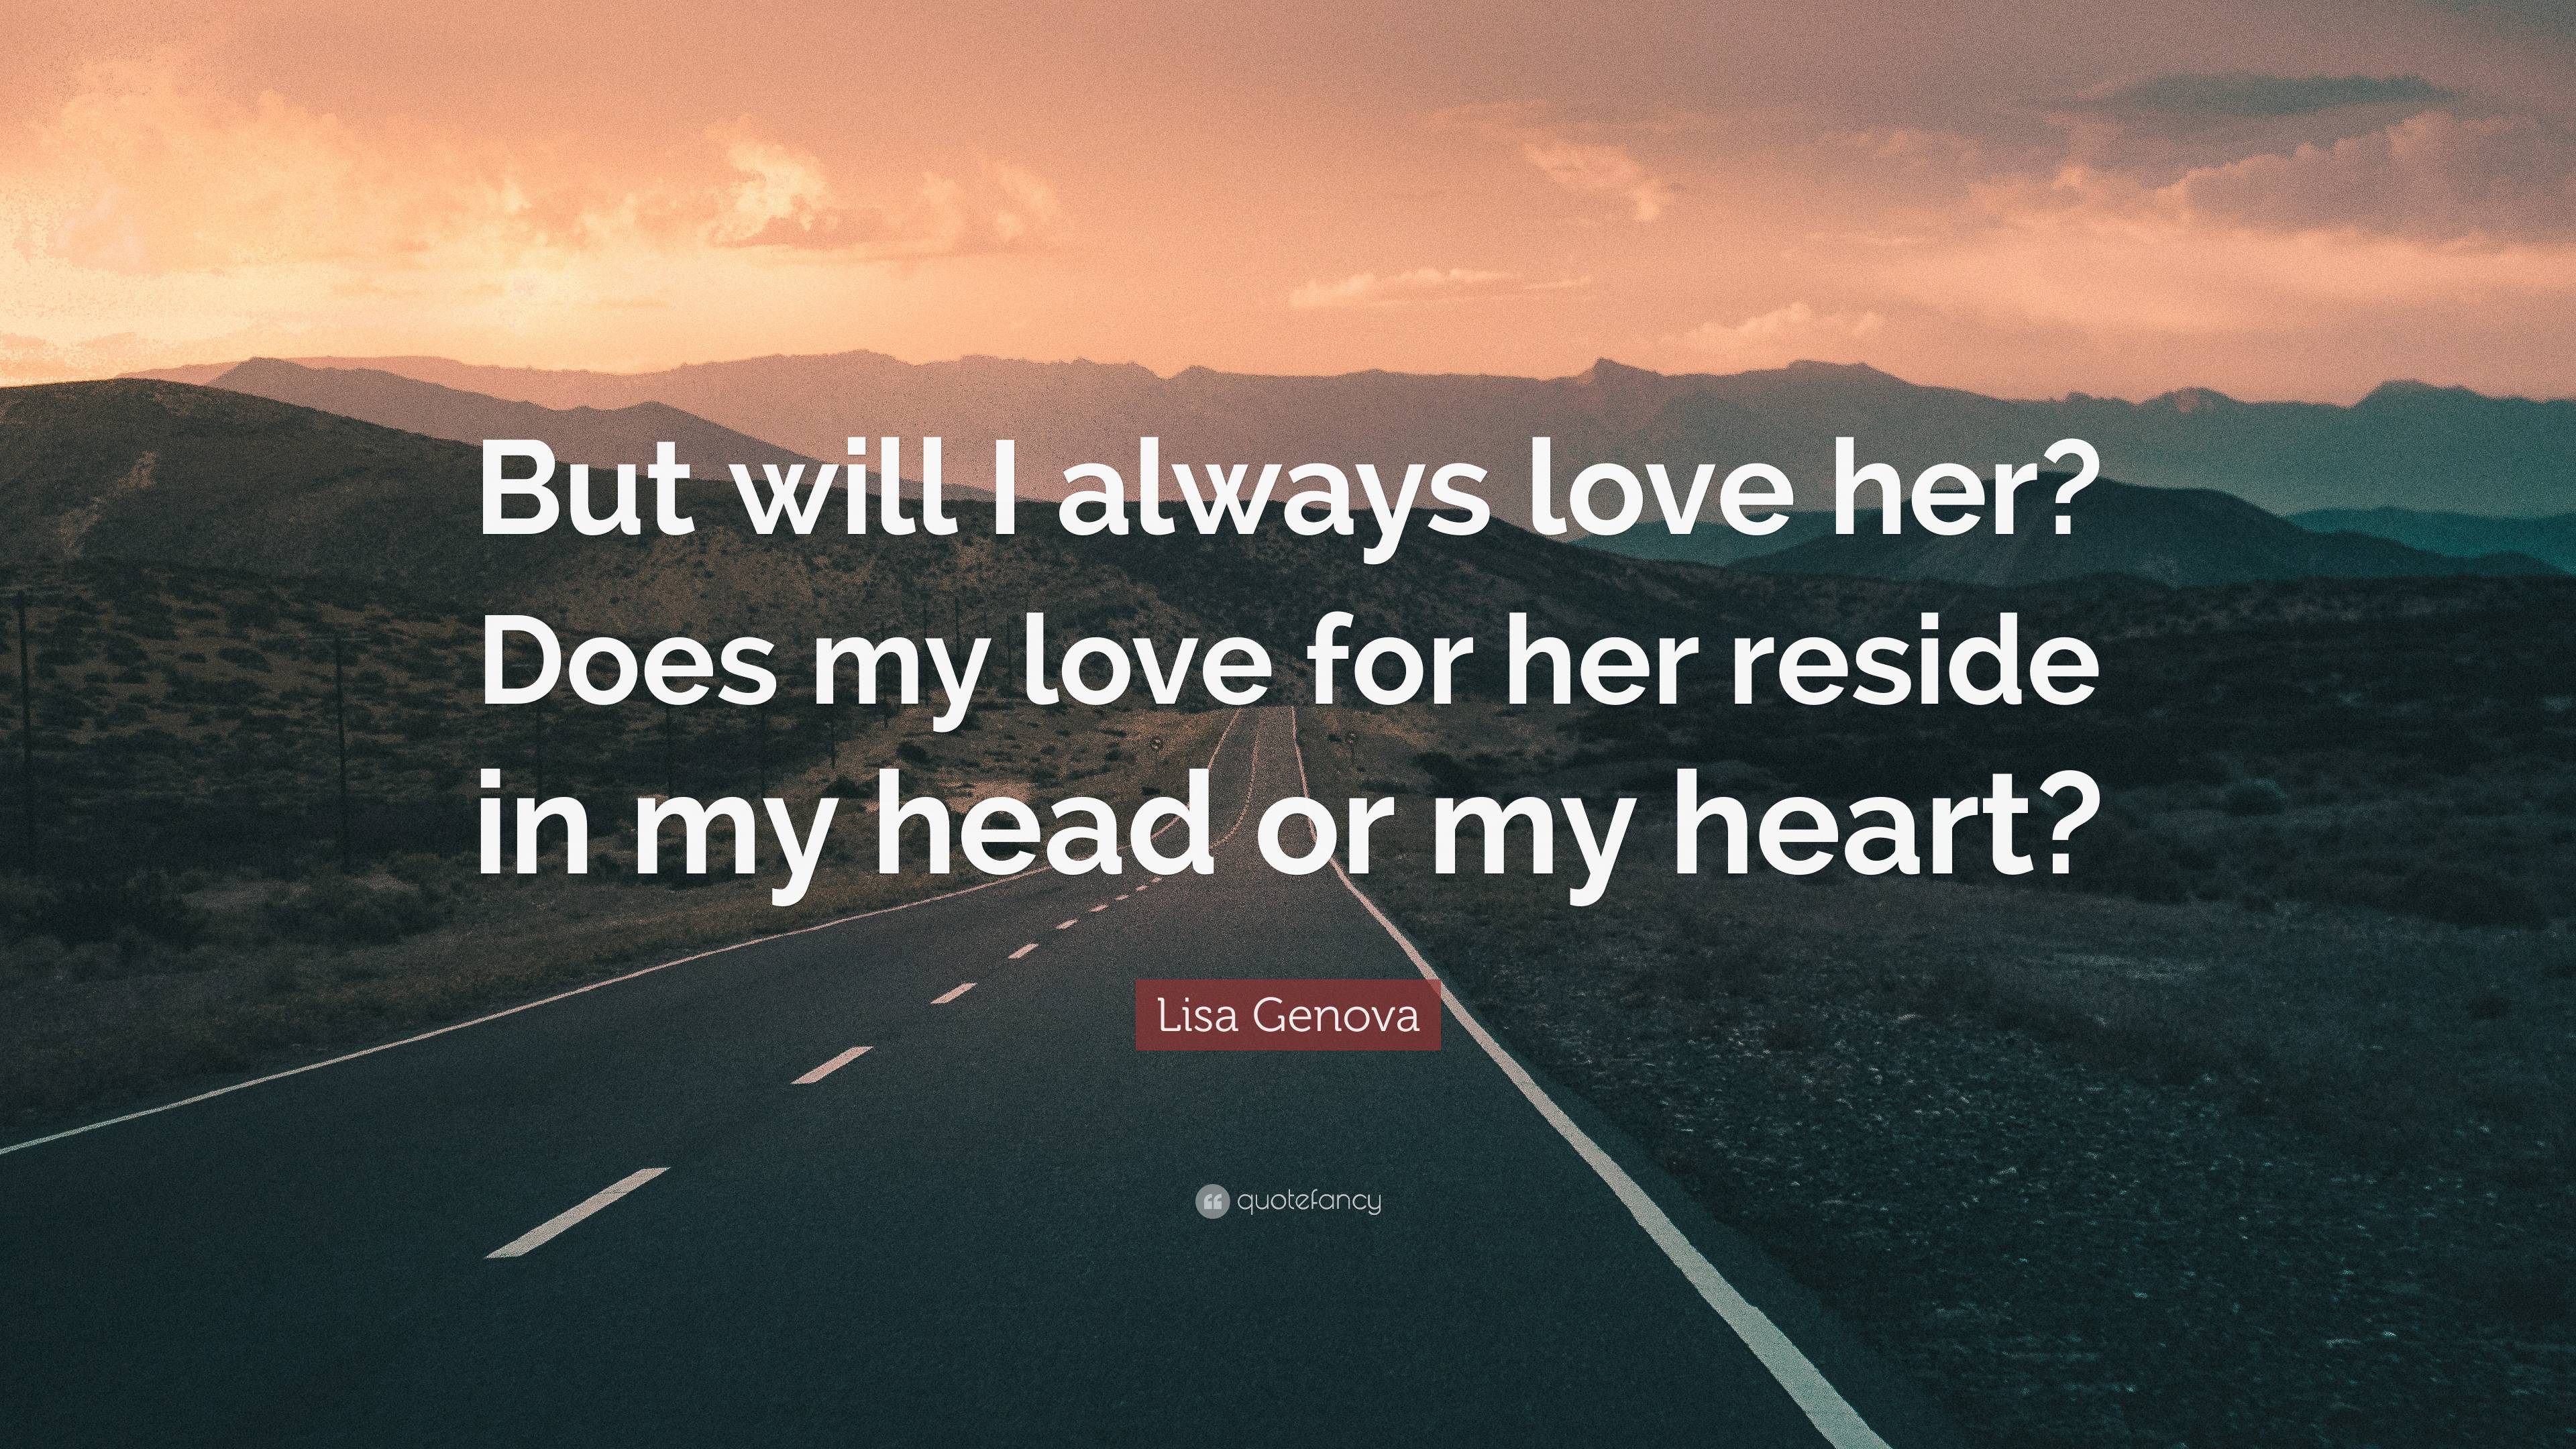 Lisa Genova Quote: “But will I always love her? Does my love for her ...